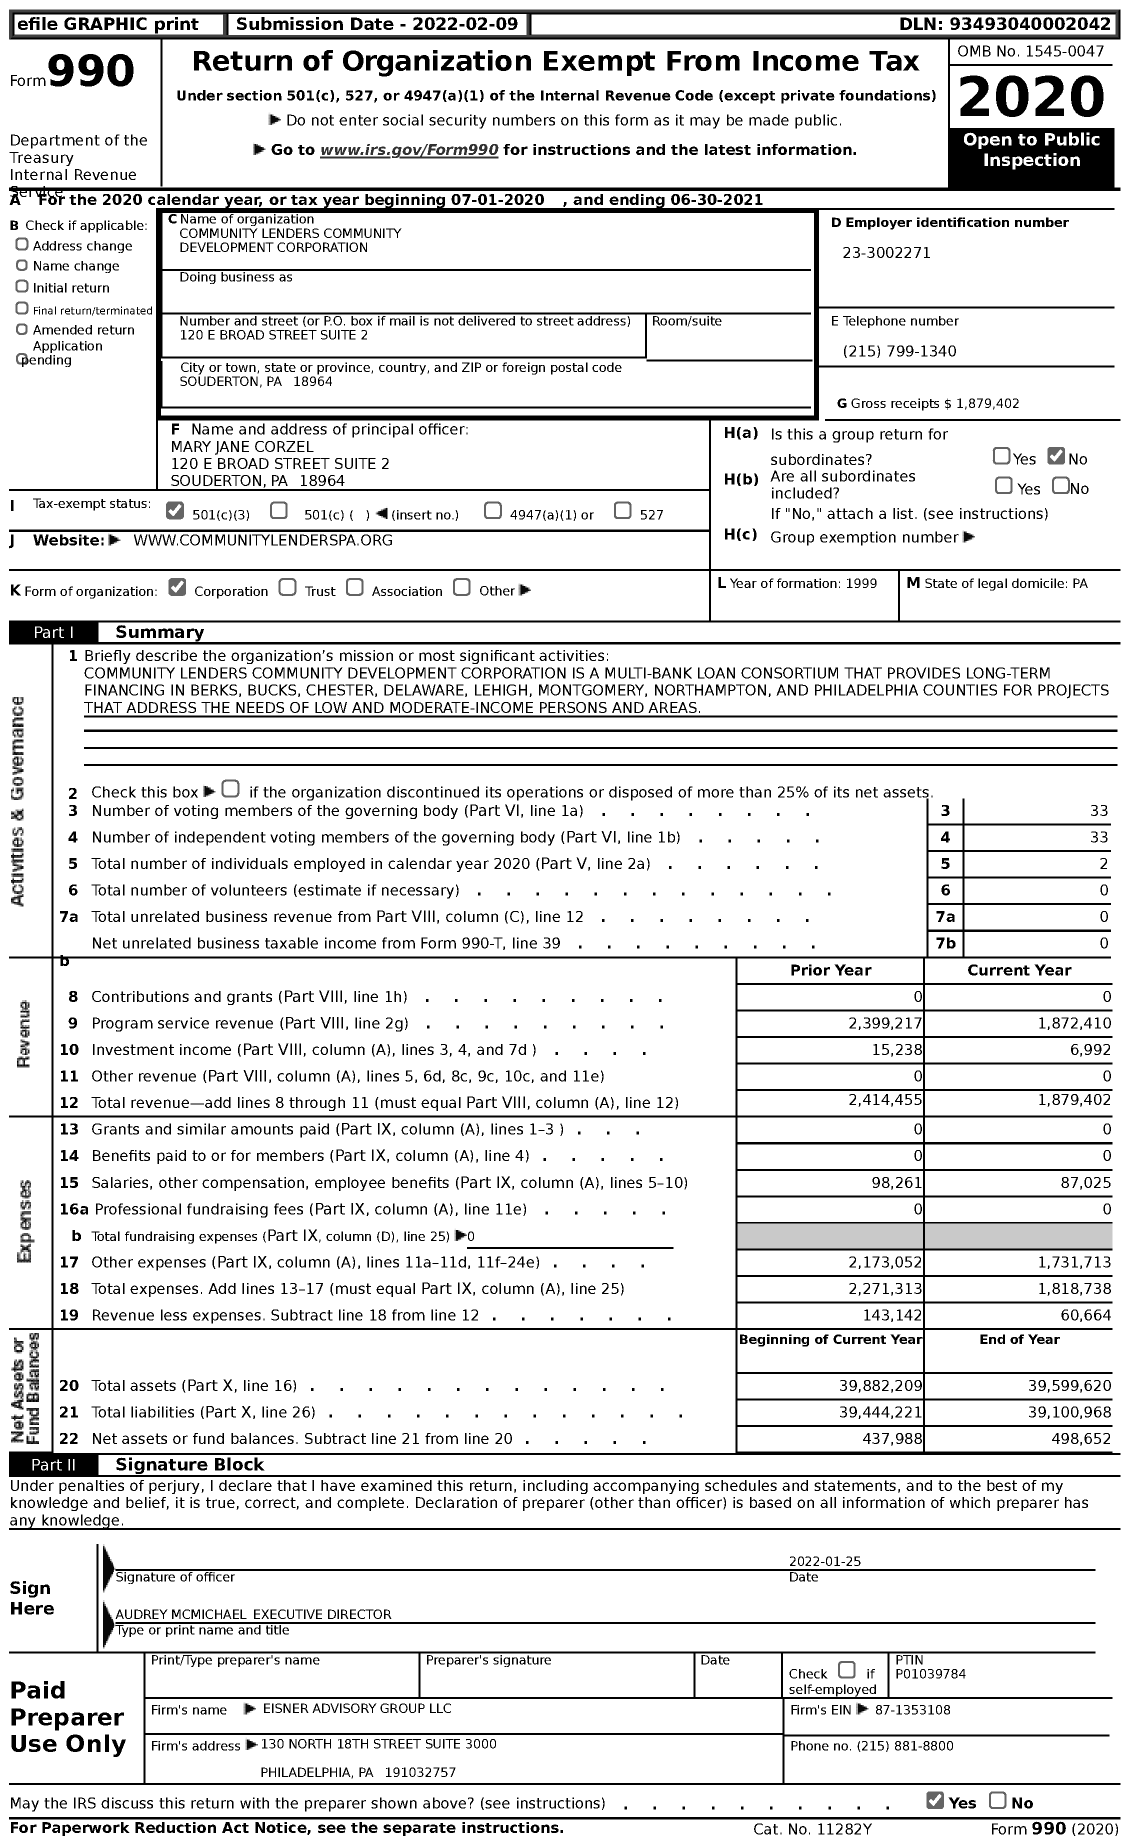 Image of first page of 2020 Form 990 for Community Lenders Community Development Corporation